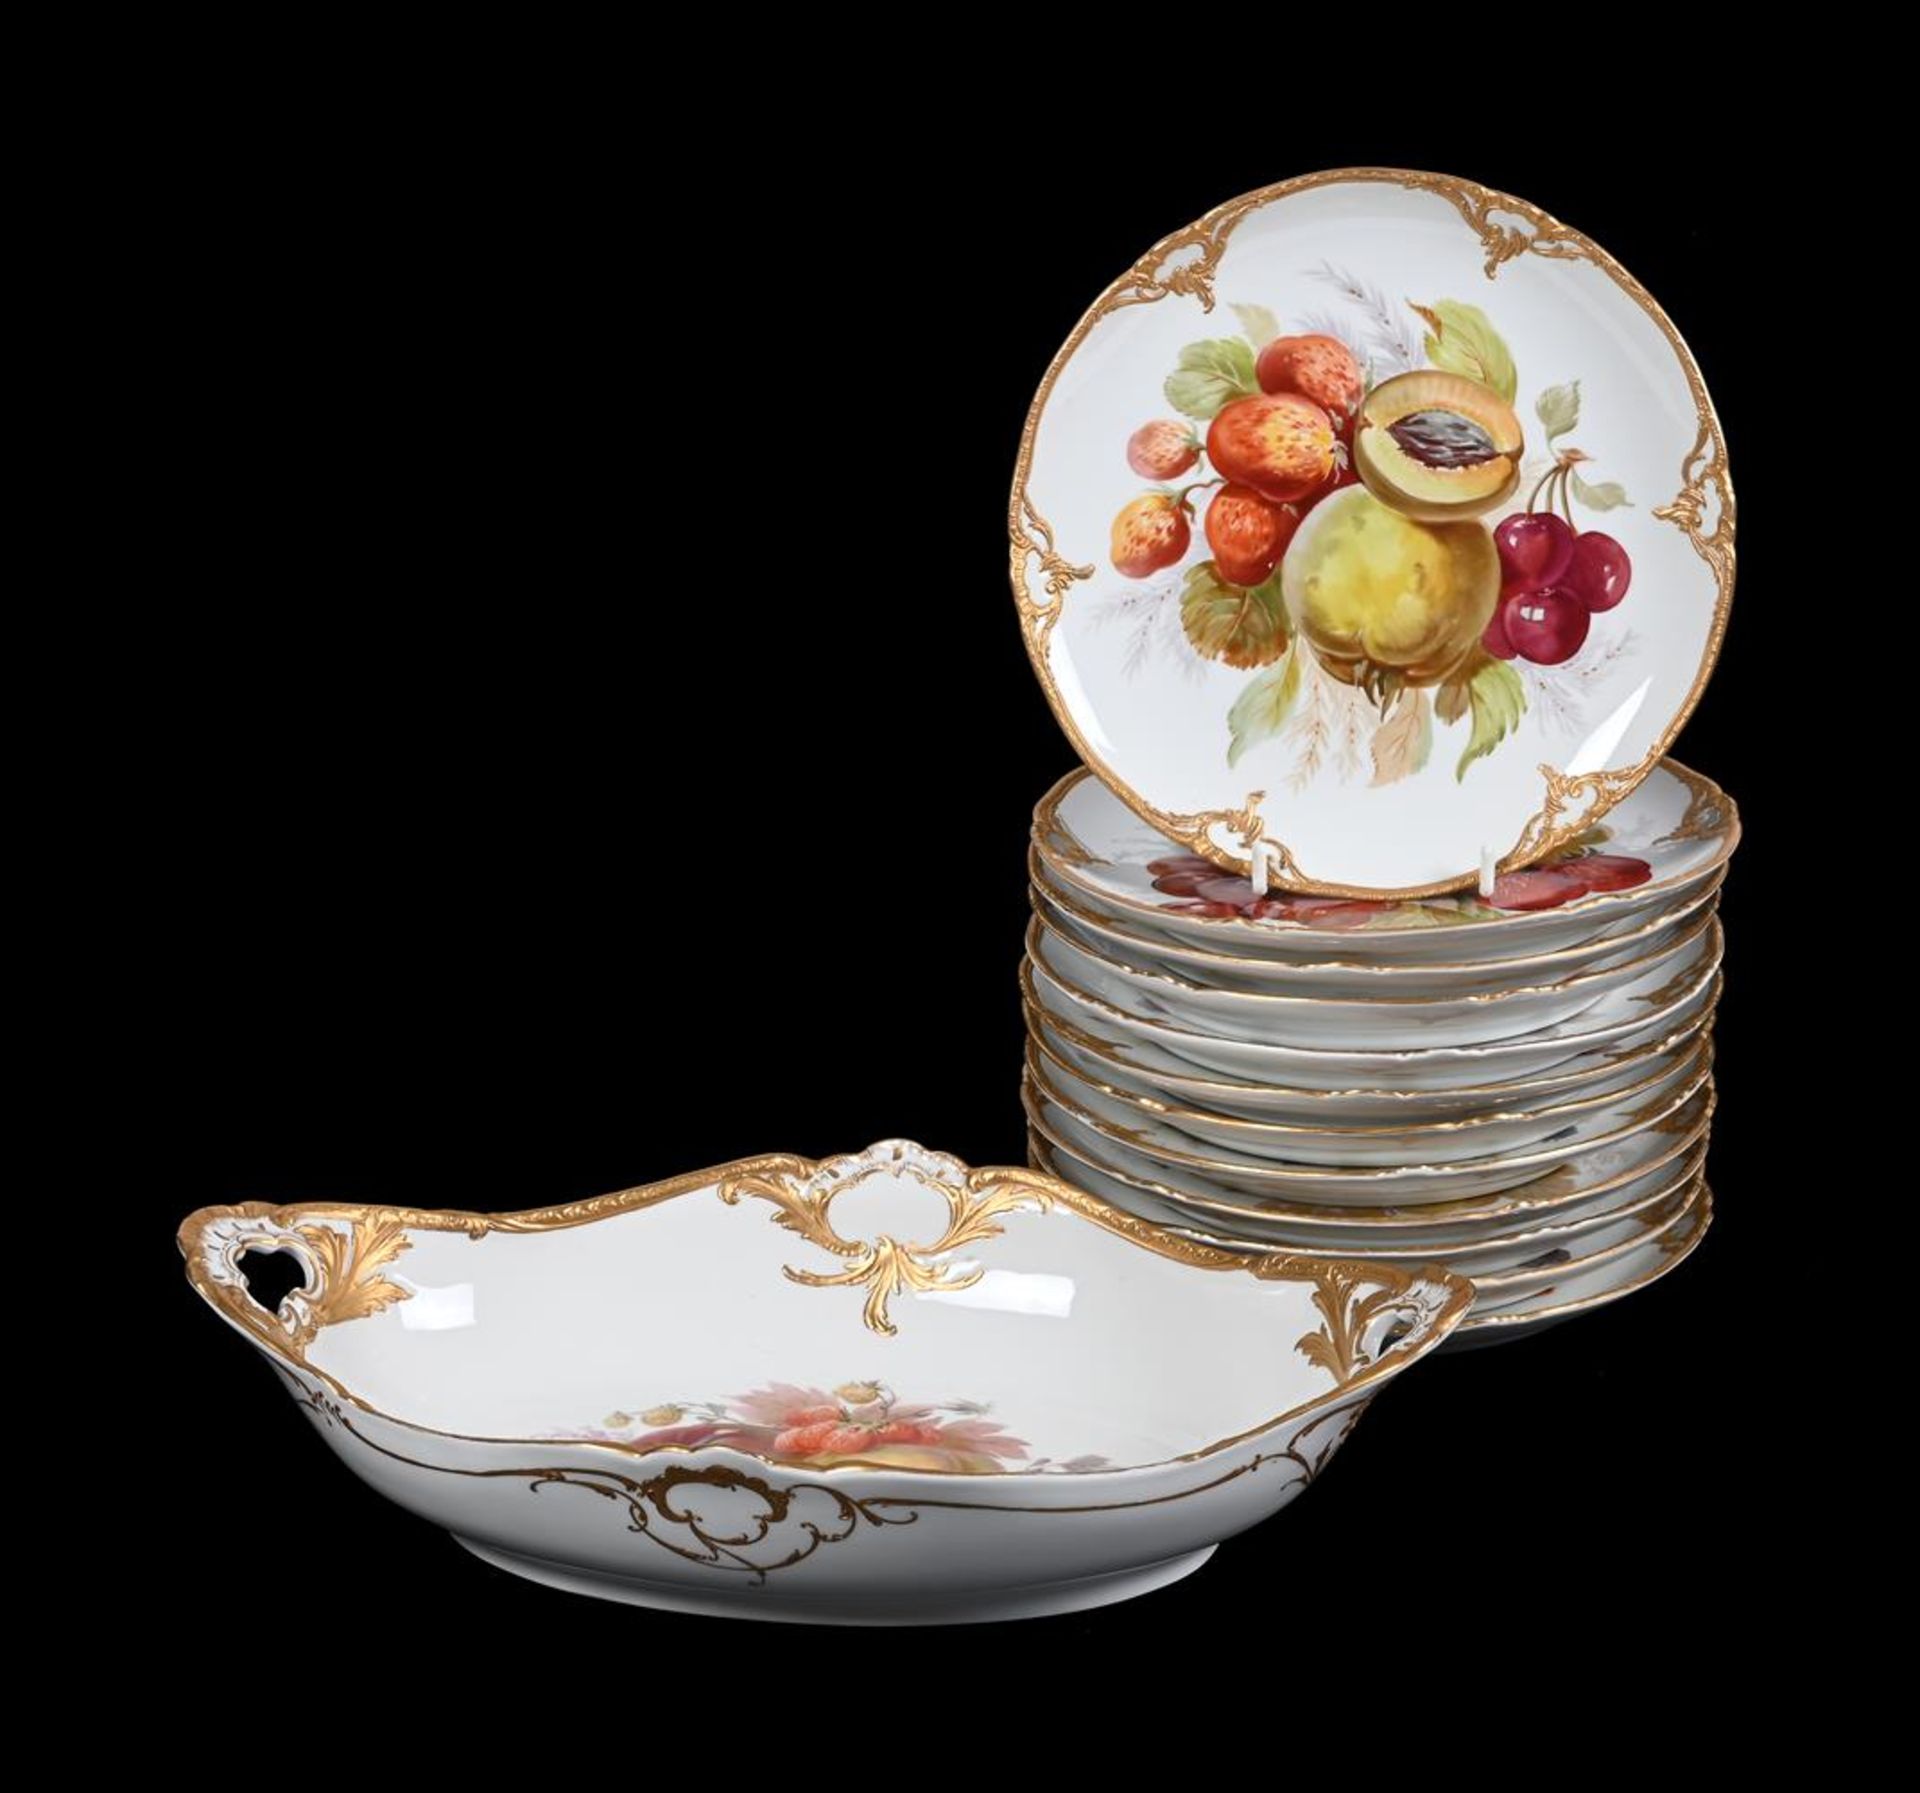 A BERLIN PORCELAIN COMPOSITE PART DESSERT SERVICECIRCA 1890 painted with fruit within a moulded an - Image 2 of 4